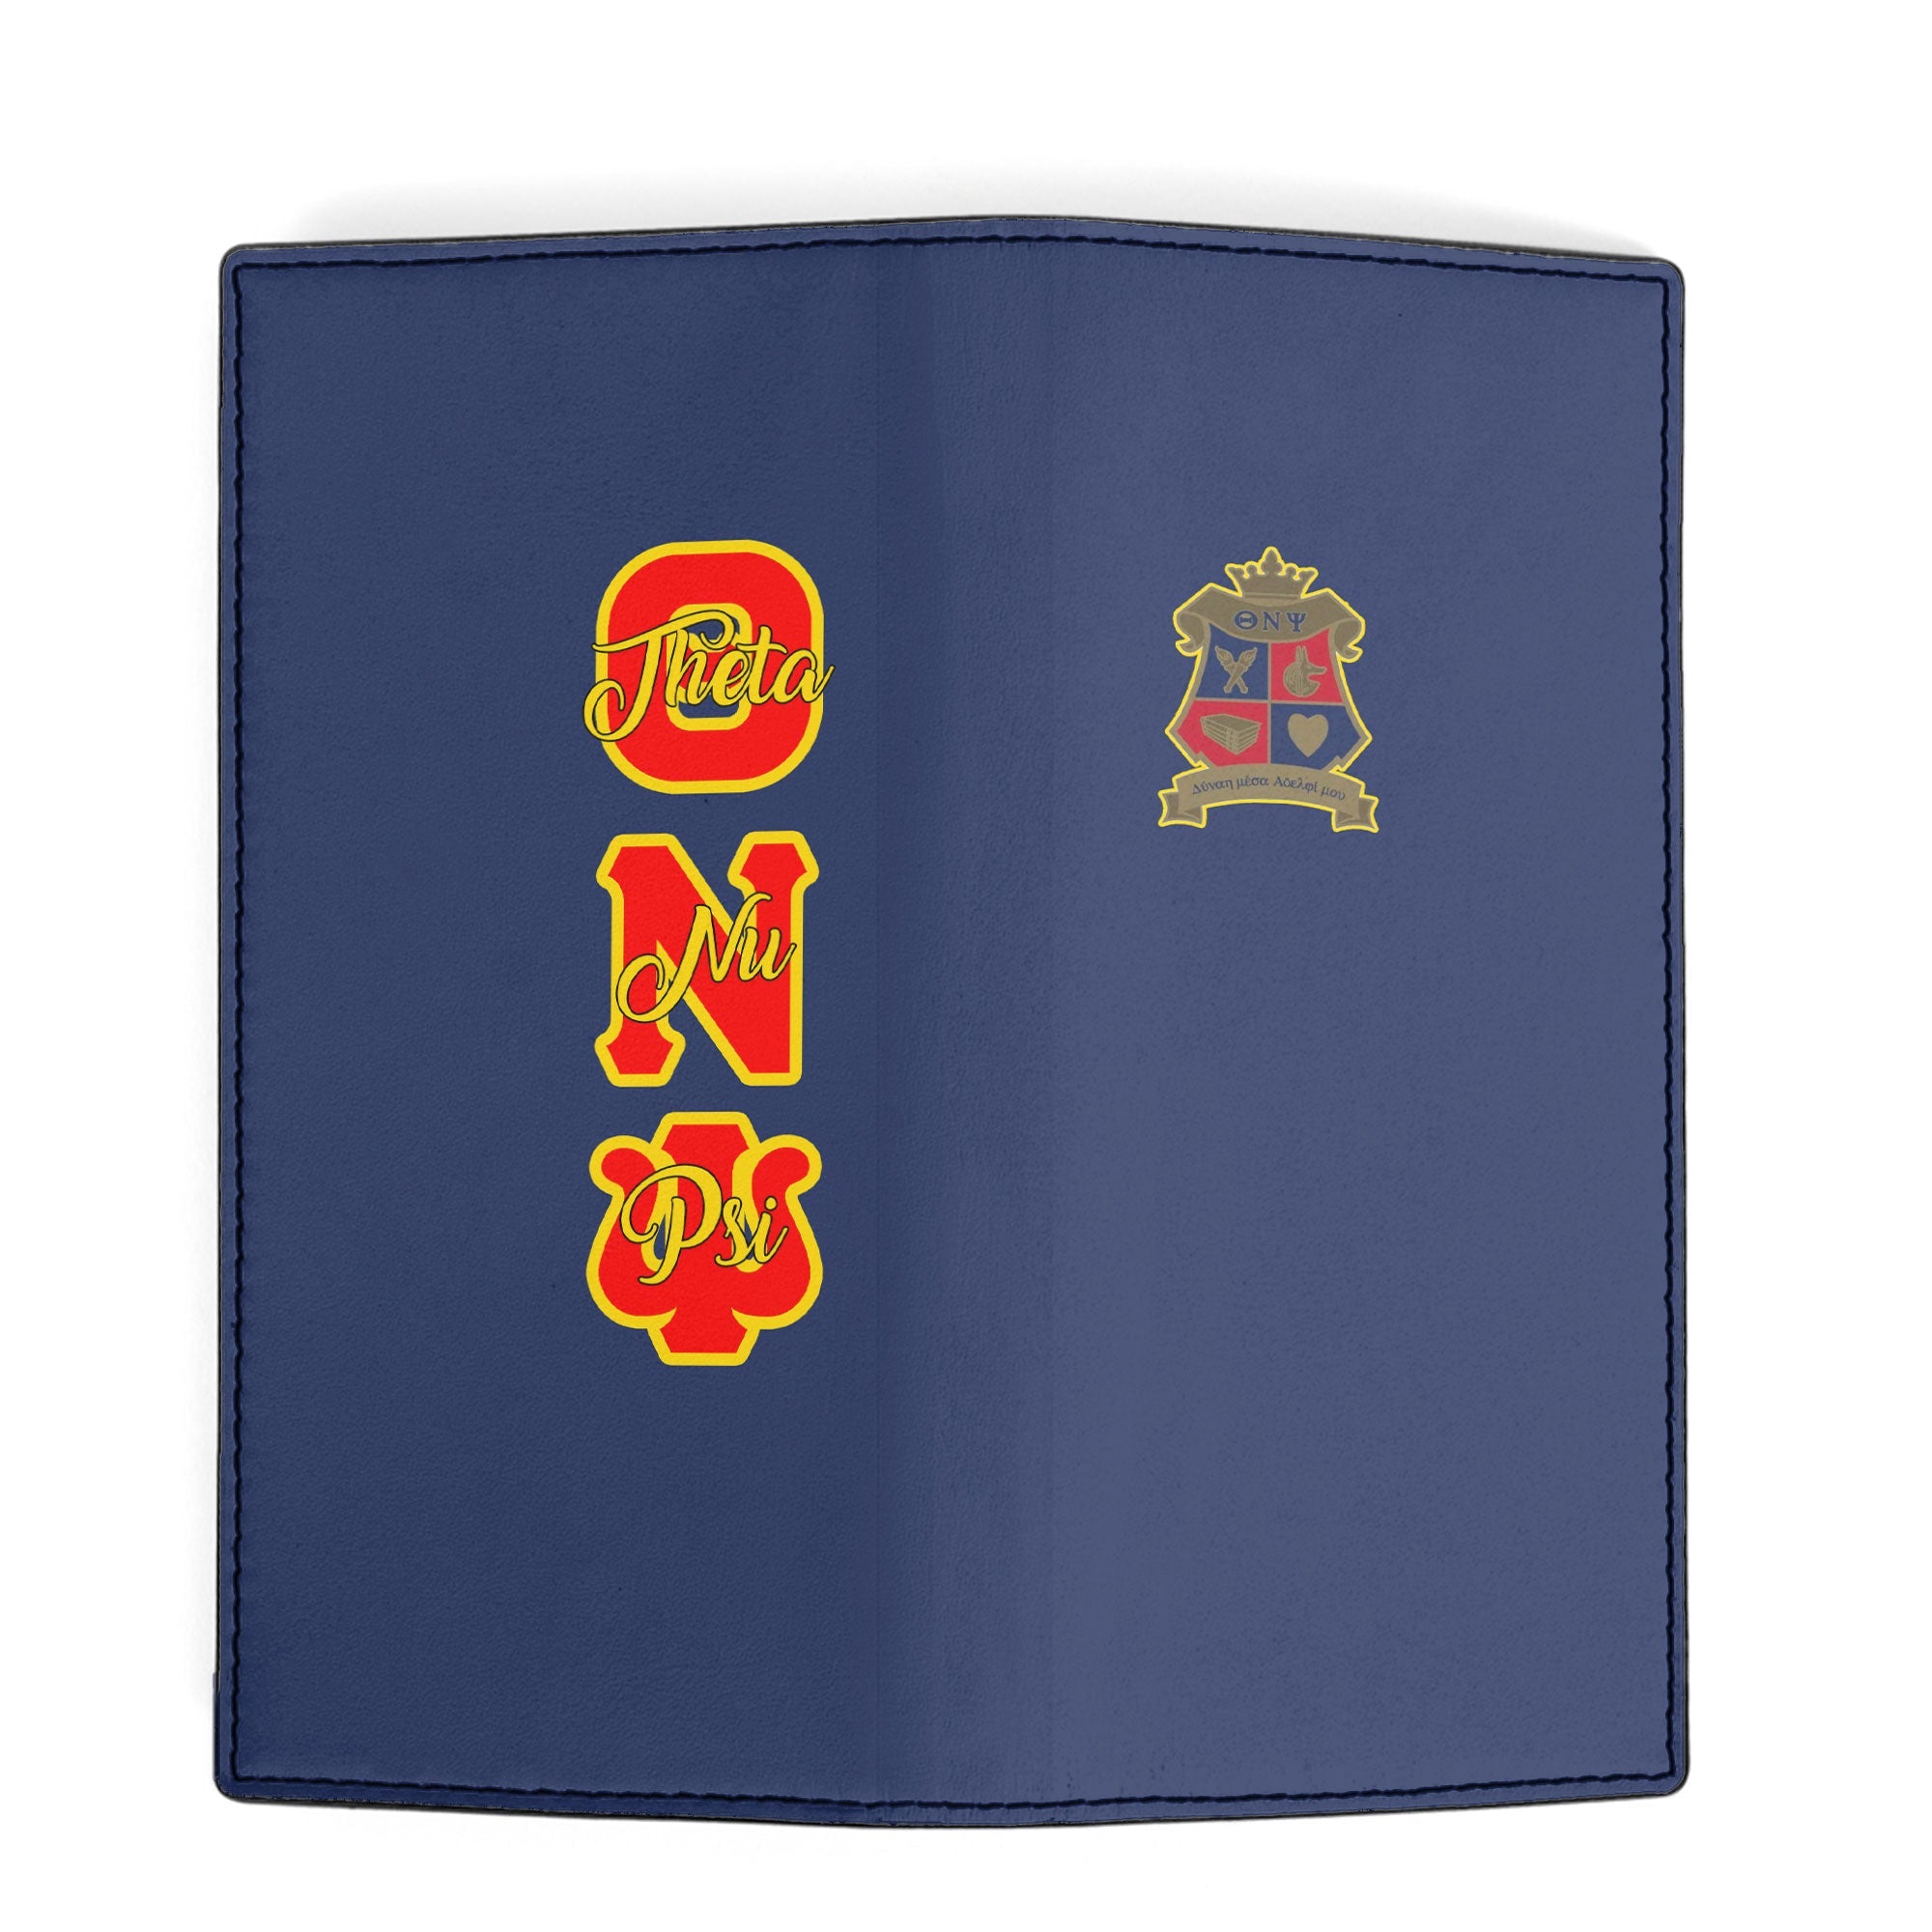 Fraternity Leather Wallet - Theta Nu Psi Leather Wallet Original Blue Style